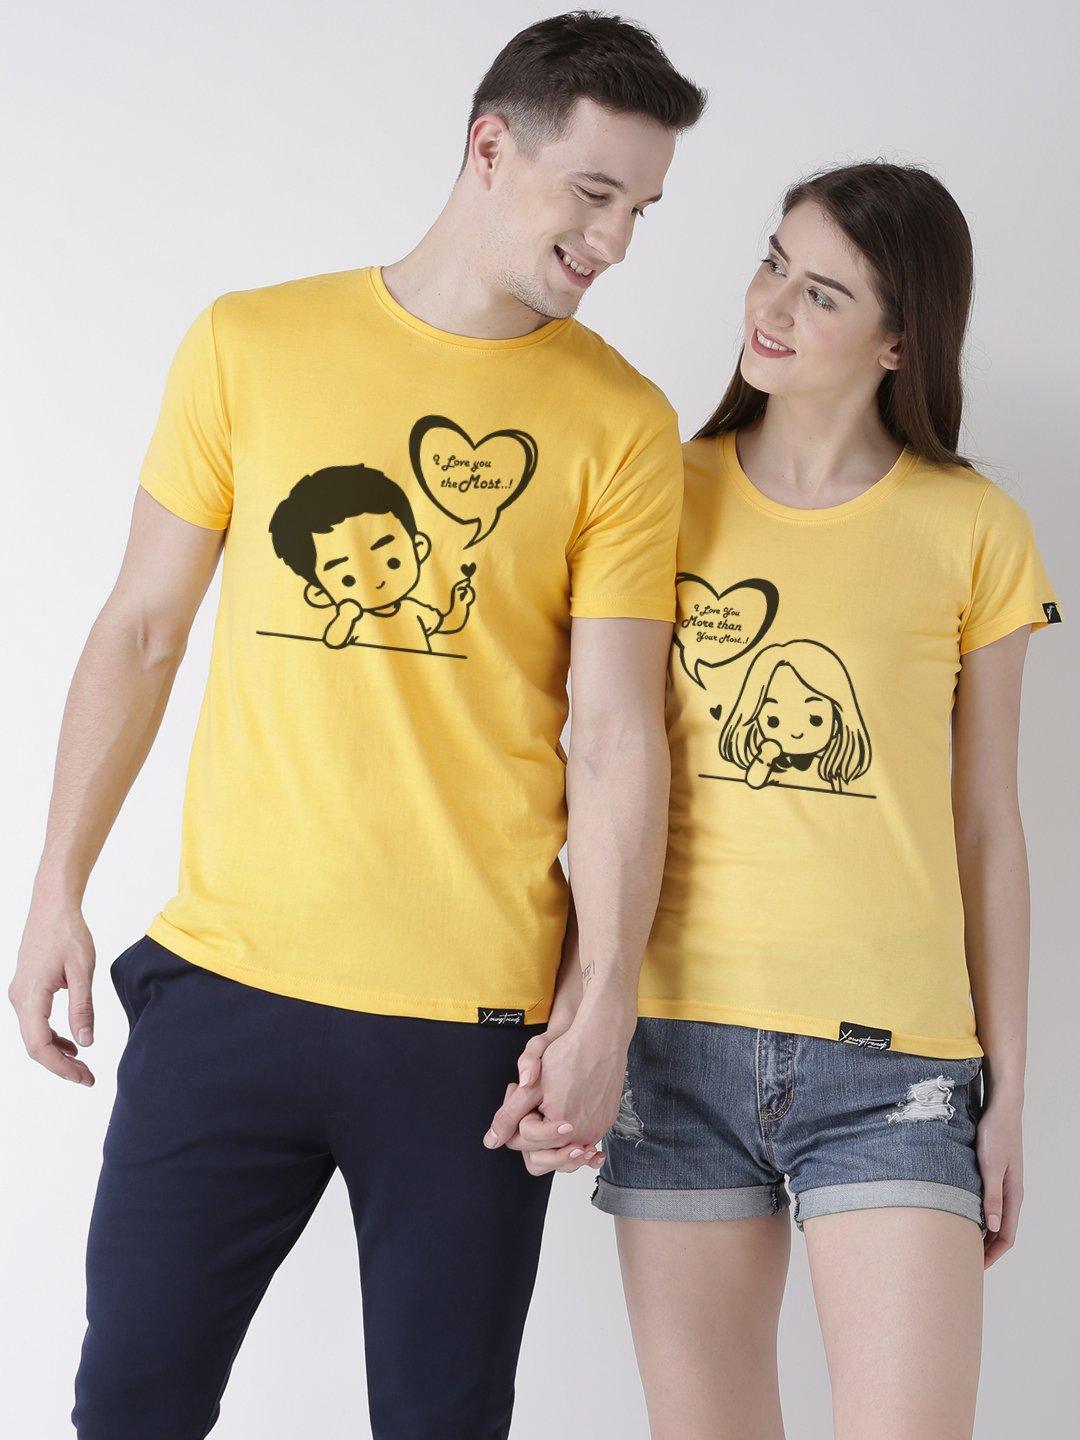 DUO Couple Bio-Wash Cotton Love you Printed Yellow Color ...